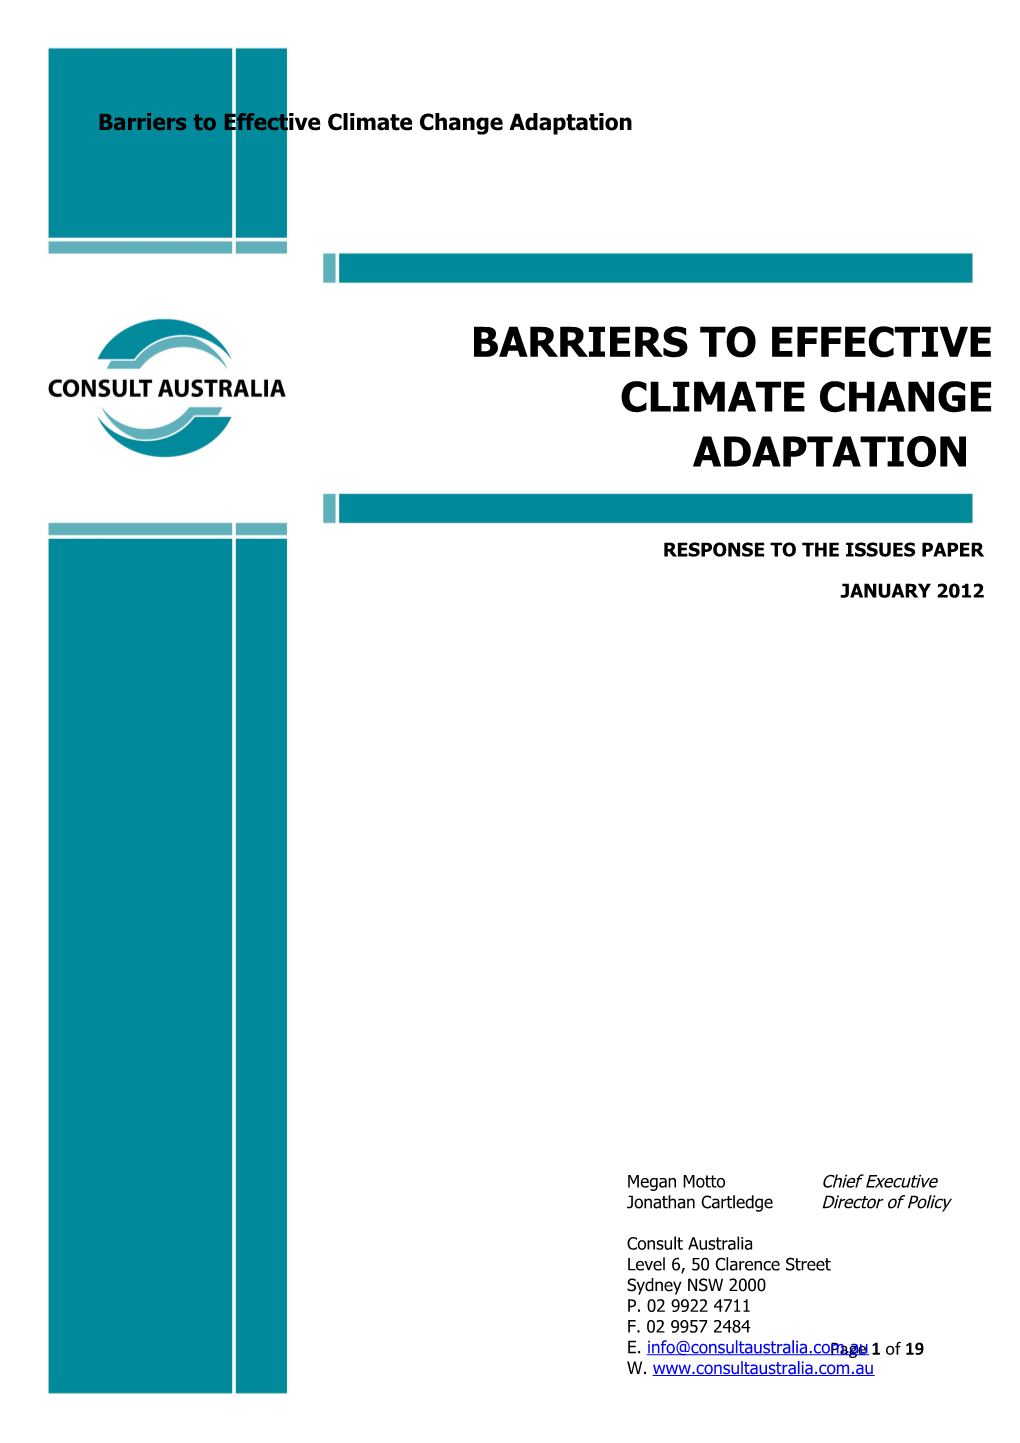 Submission 71 - Consult Australia - Barriers to Effective Climate Change Adaption - Public